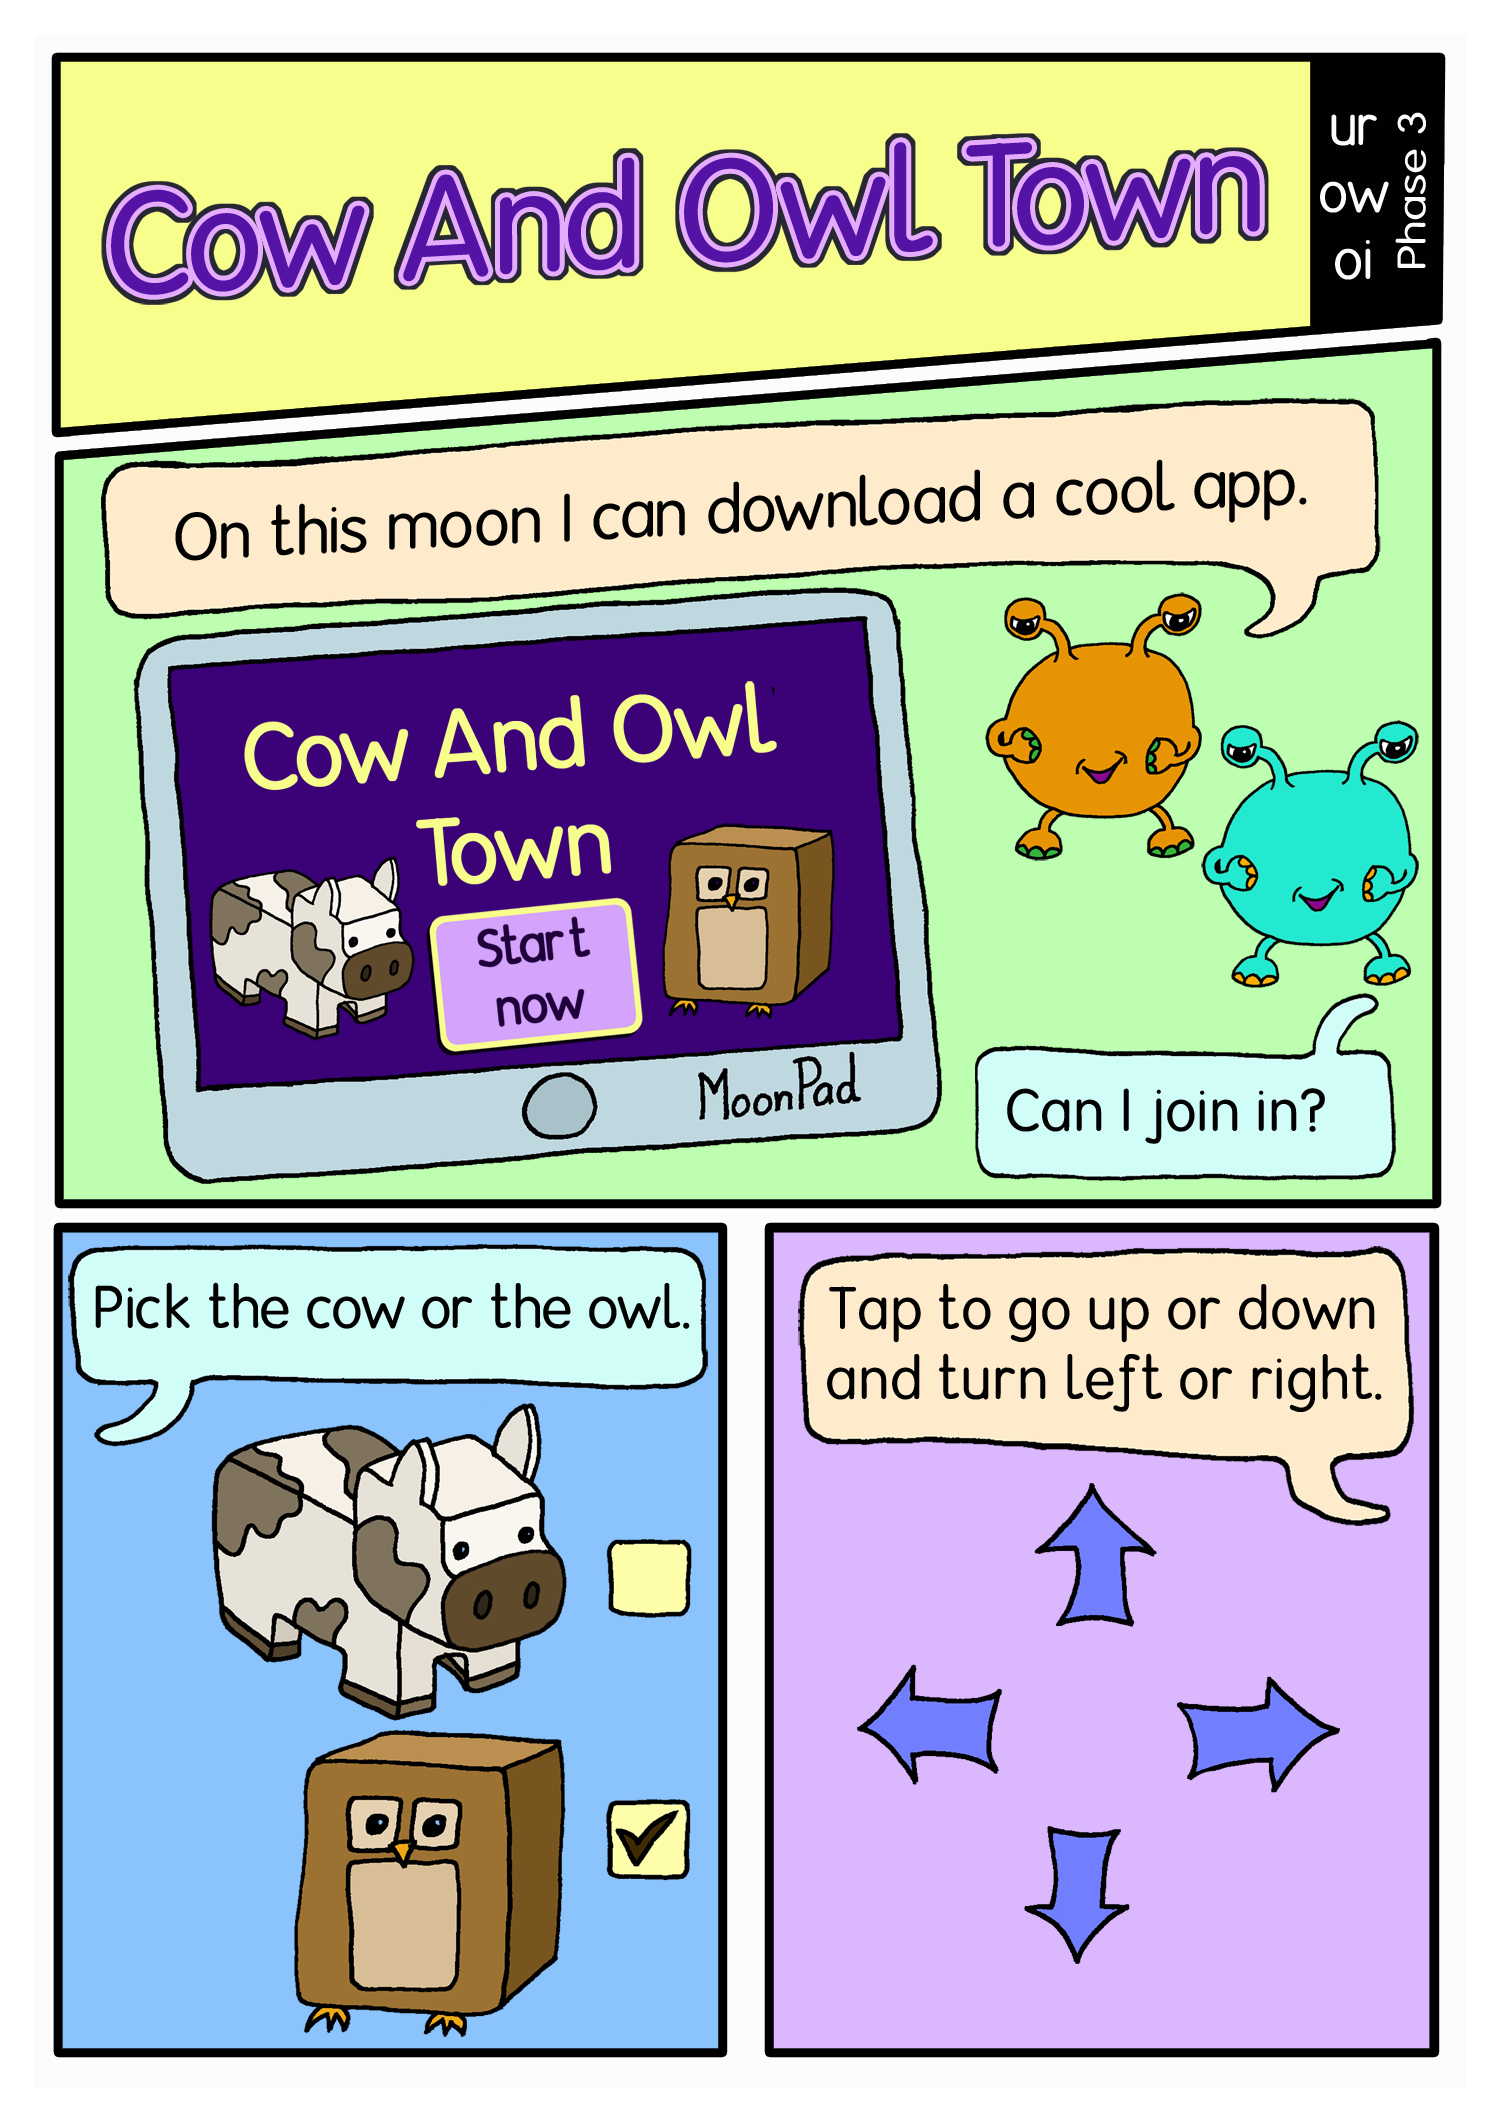 Cow And Owl Town comic panel1